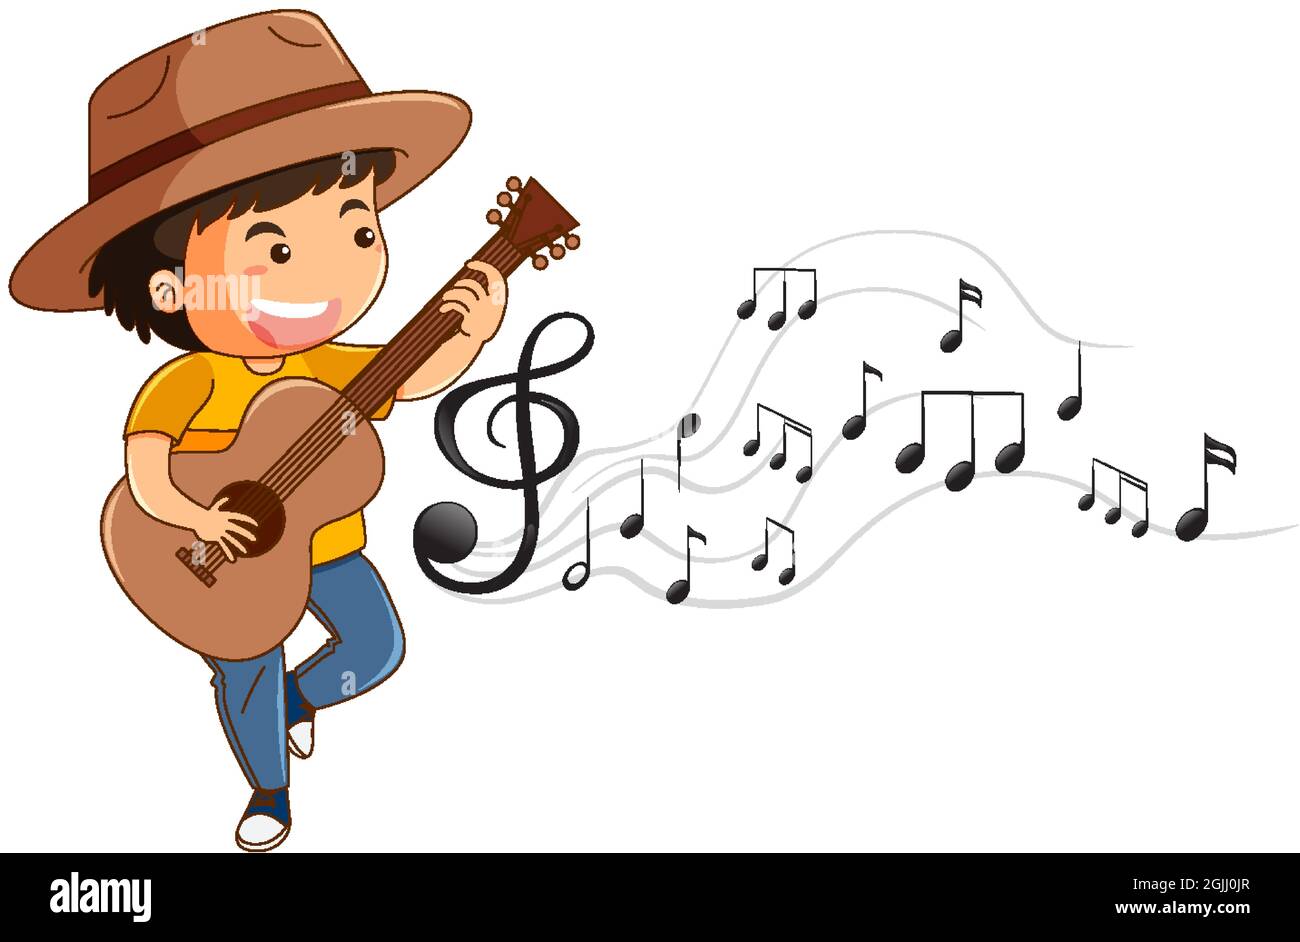 Cartoon character of a boy playing guitar with melody symbols illustration  Stock Vector Image & Art - Alamy